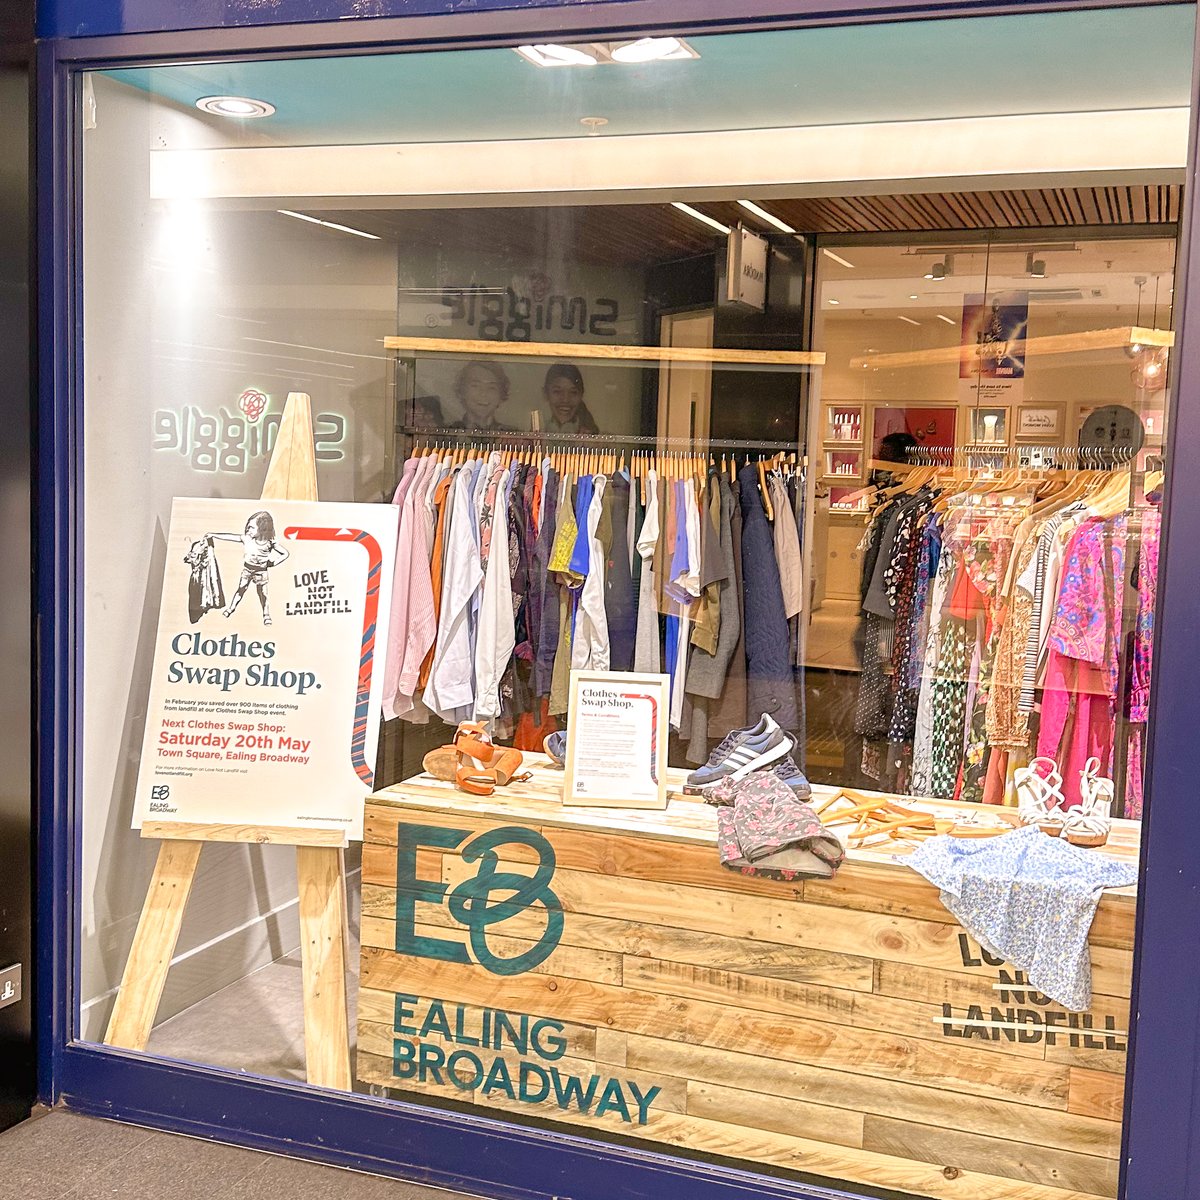 On Saturday 20th May @ealingshopping are running a clothes swap shop in the town square located inside the @ealingshopping centre. This event is back by popular demand after Februarys event helped to save over 900 items from landfill! #clothesswap #reducelandfill #clotheswap